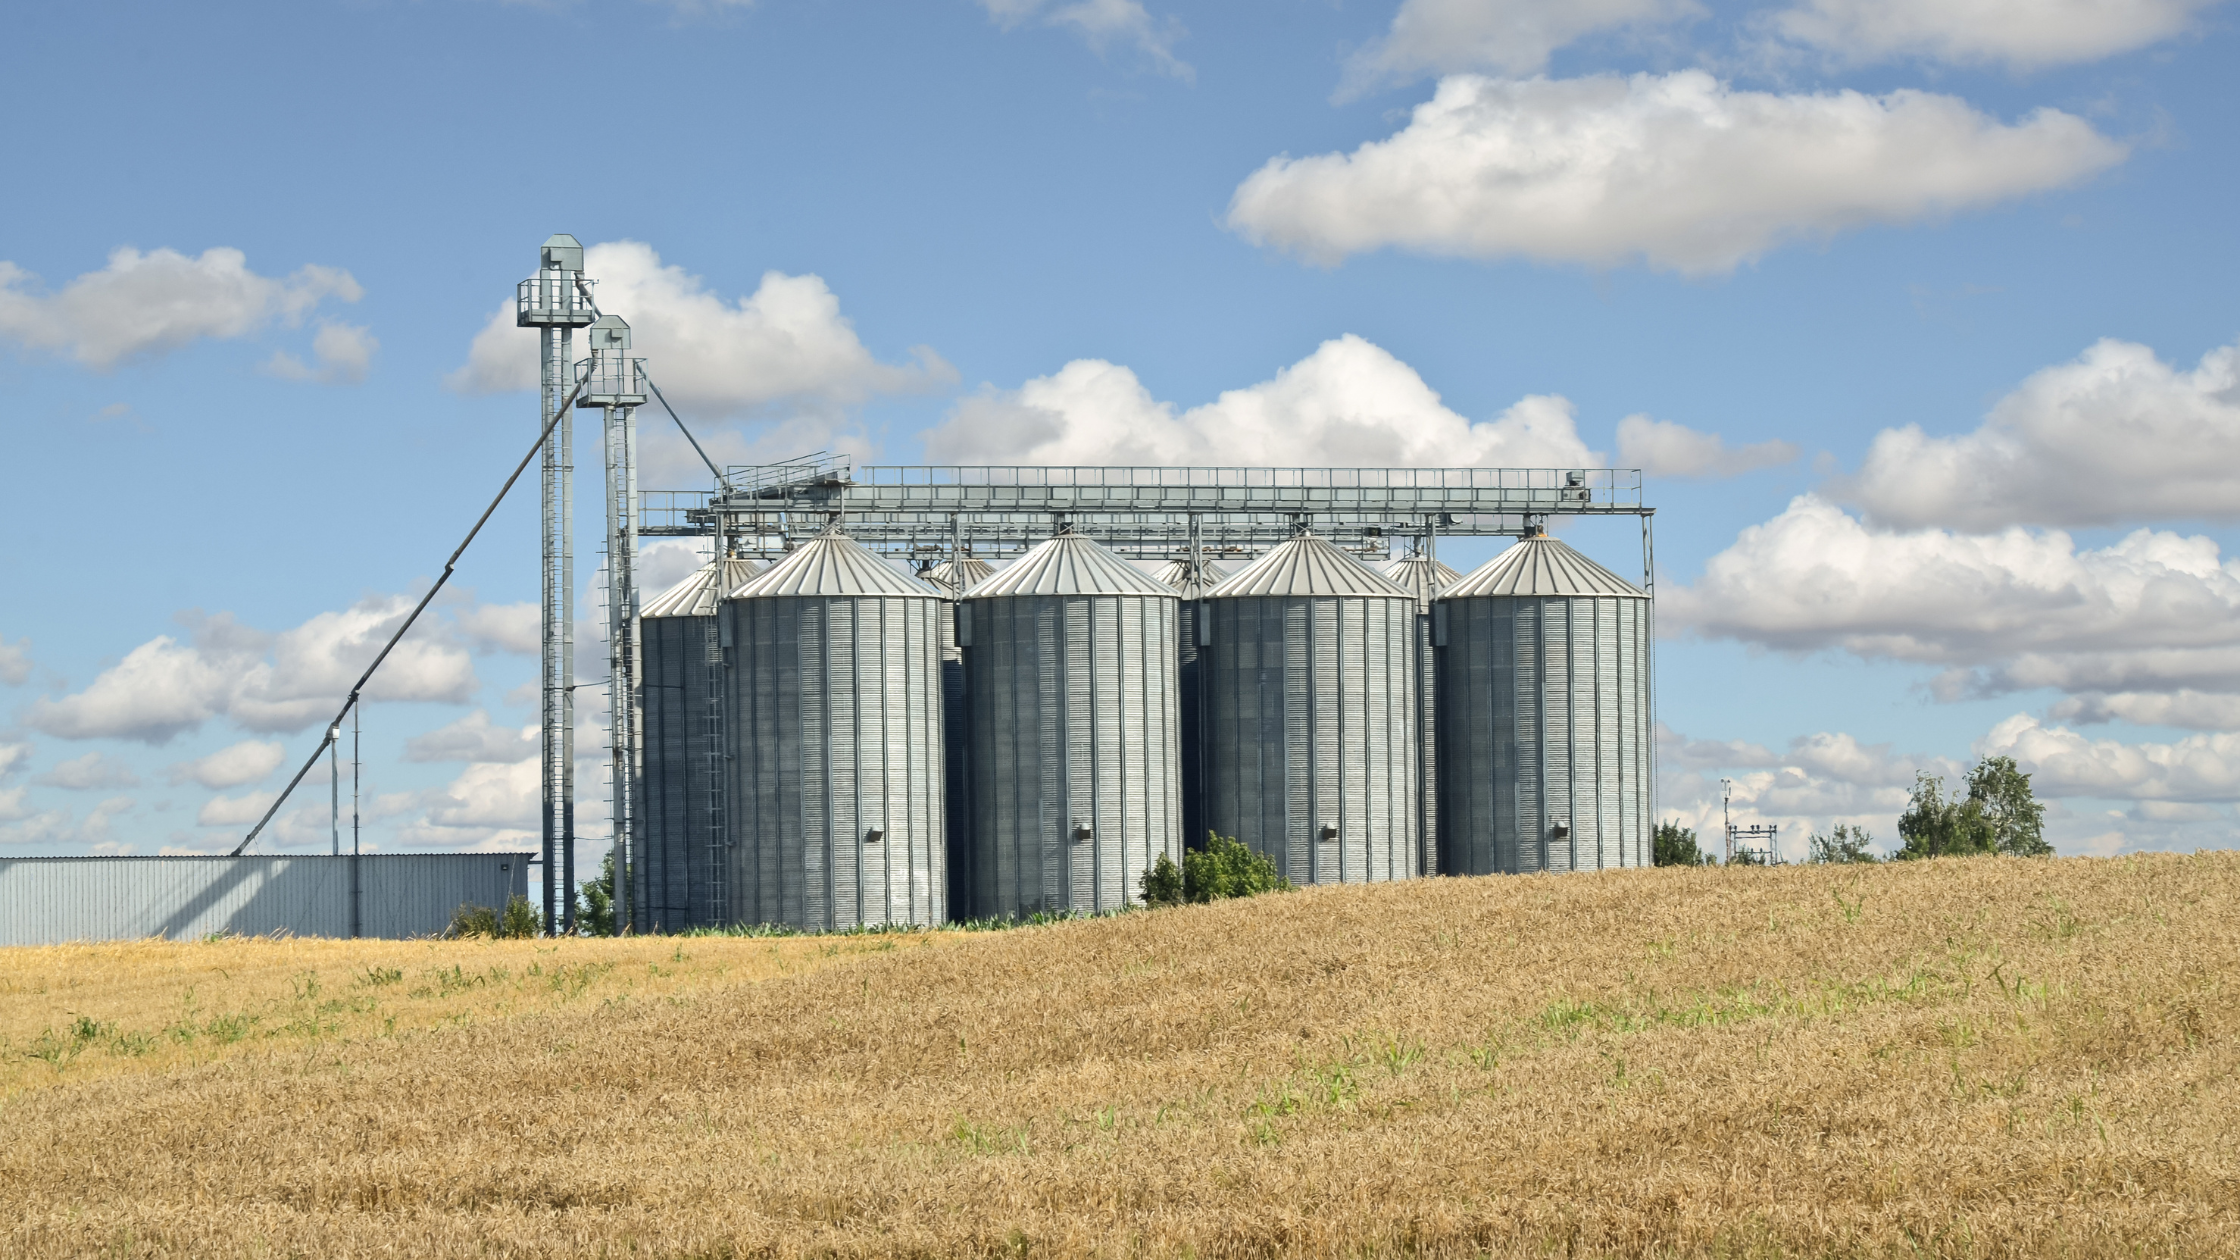 Attebury Grain modernizes its supply chain with self-service analytics using Cloudwick’s Amorphic Data Cloud for AWS